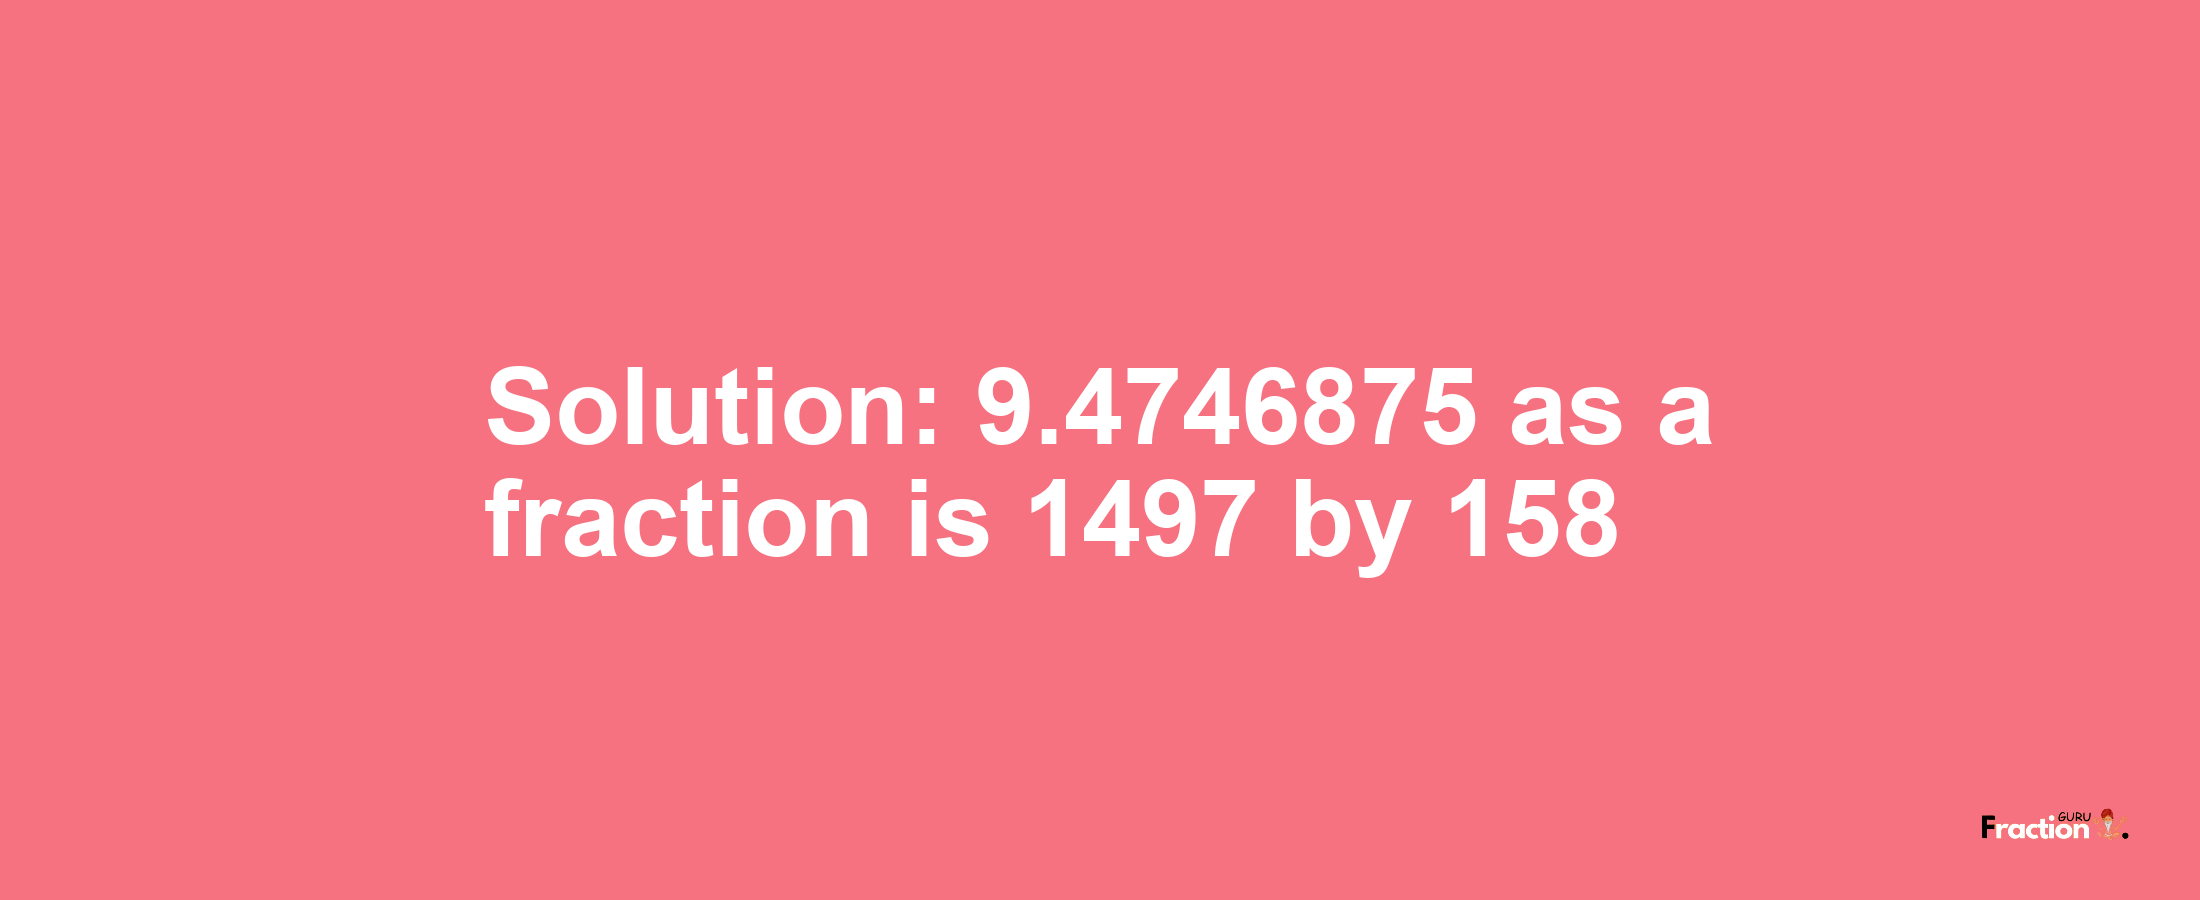 Solution:9.4746875 as a fraction is 1497/158